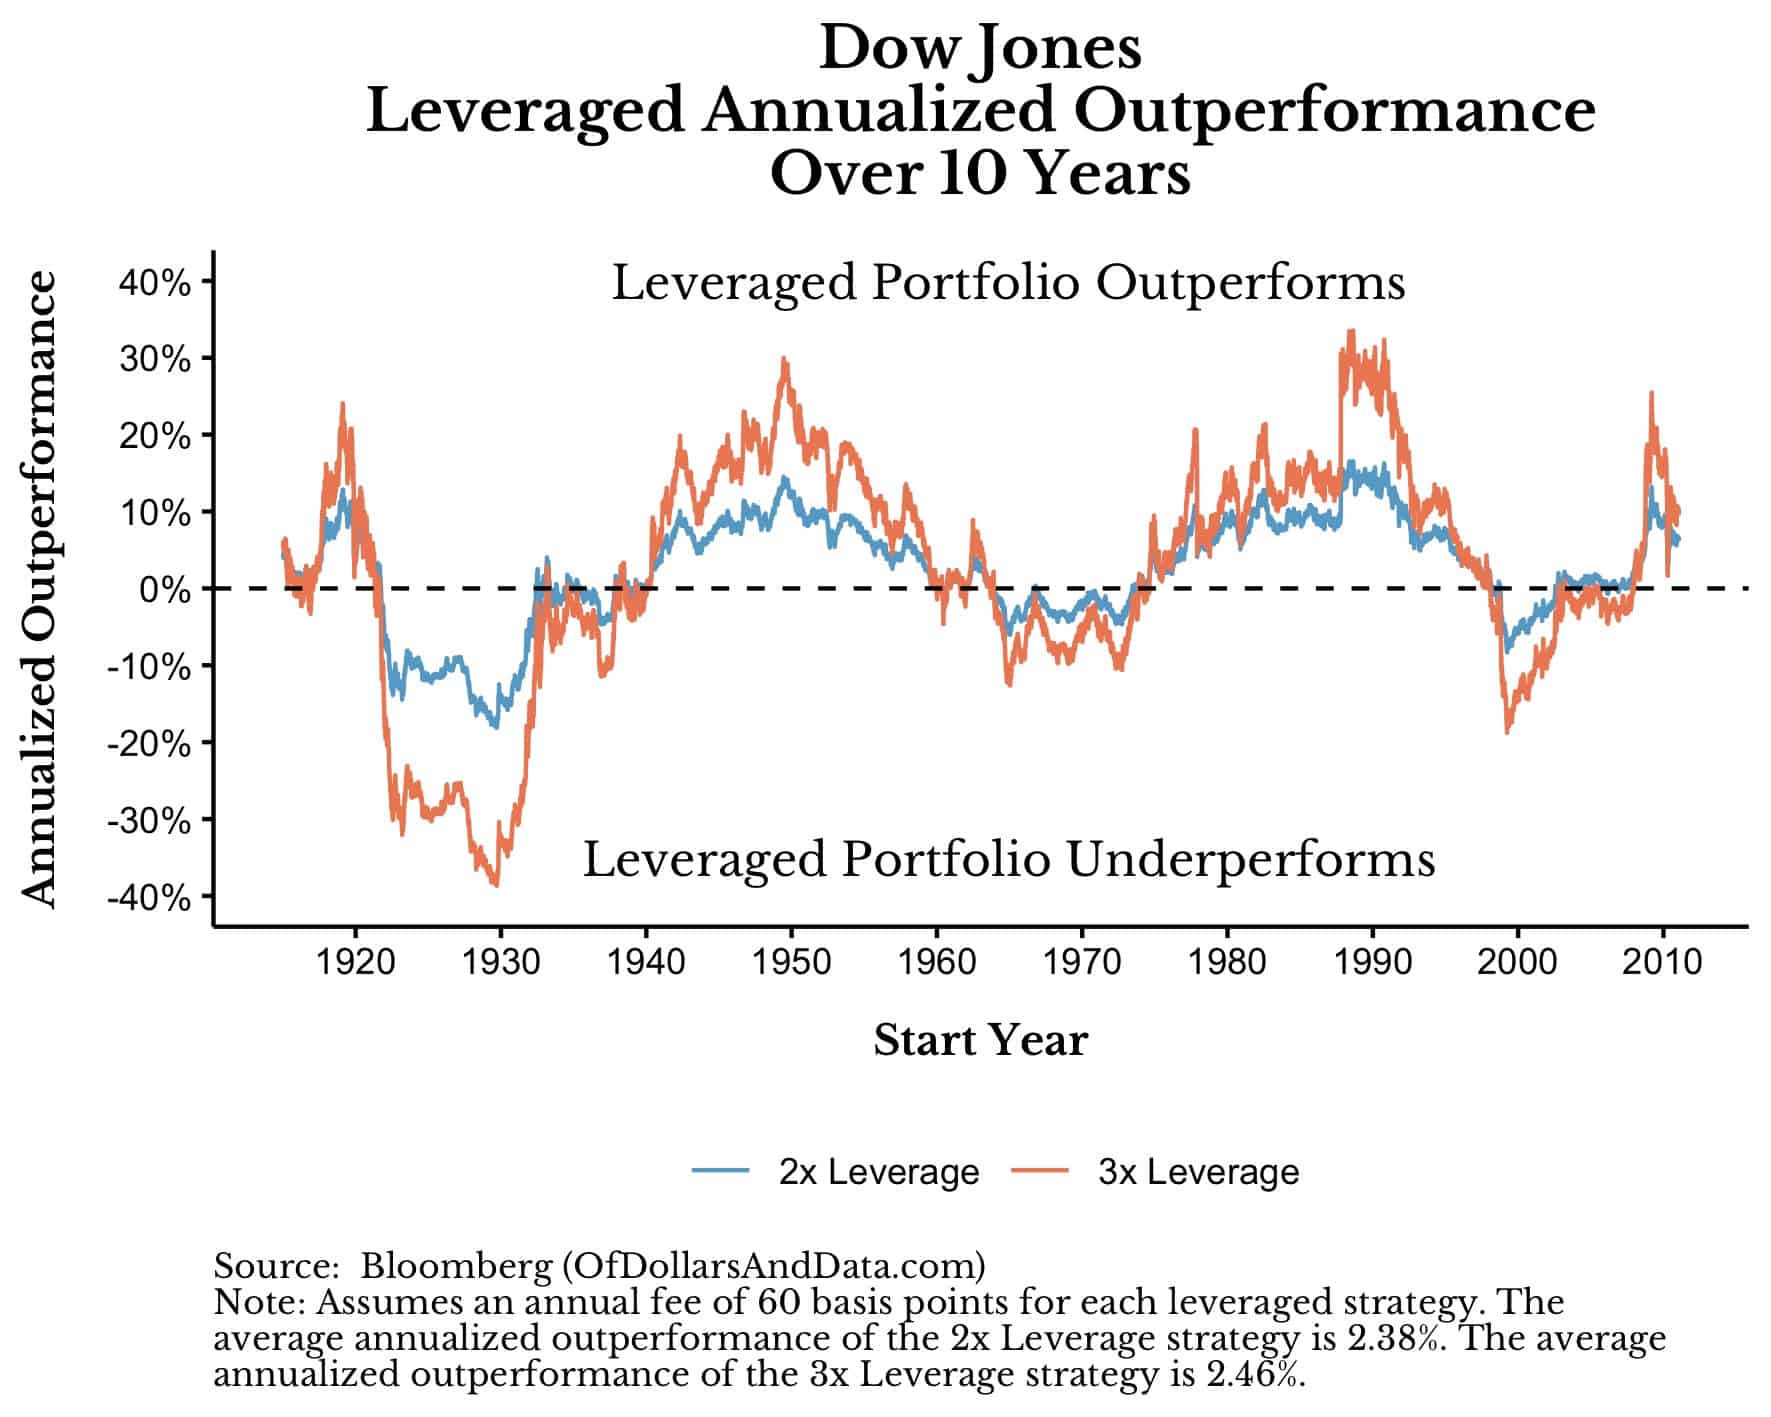 Dow 2x and 3x levered portfolios performance over 10 year rolling periods since 1915